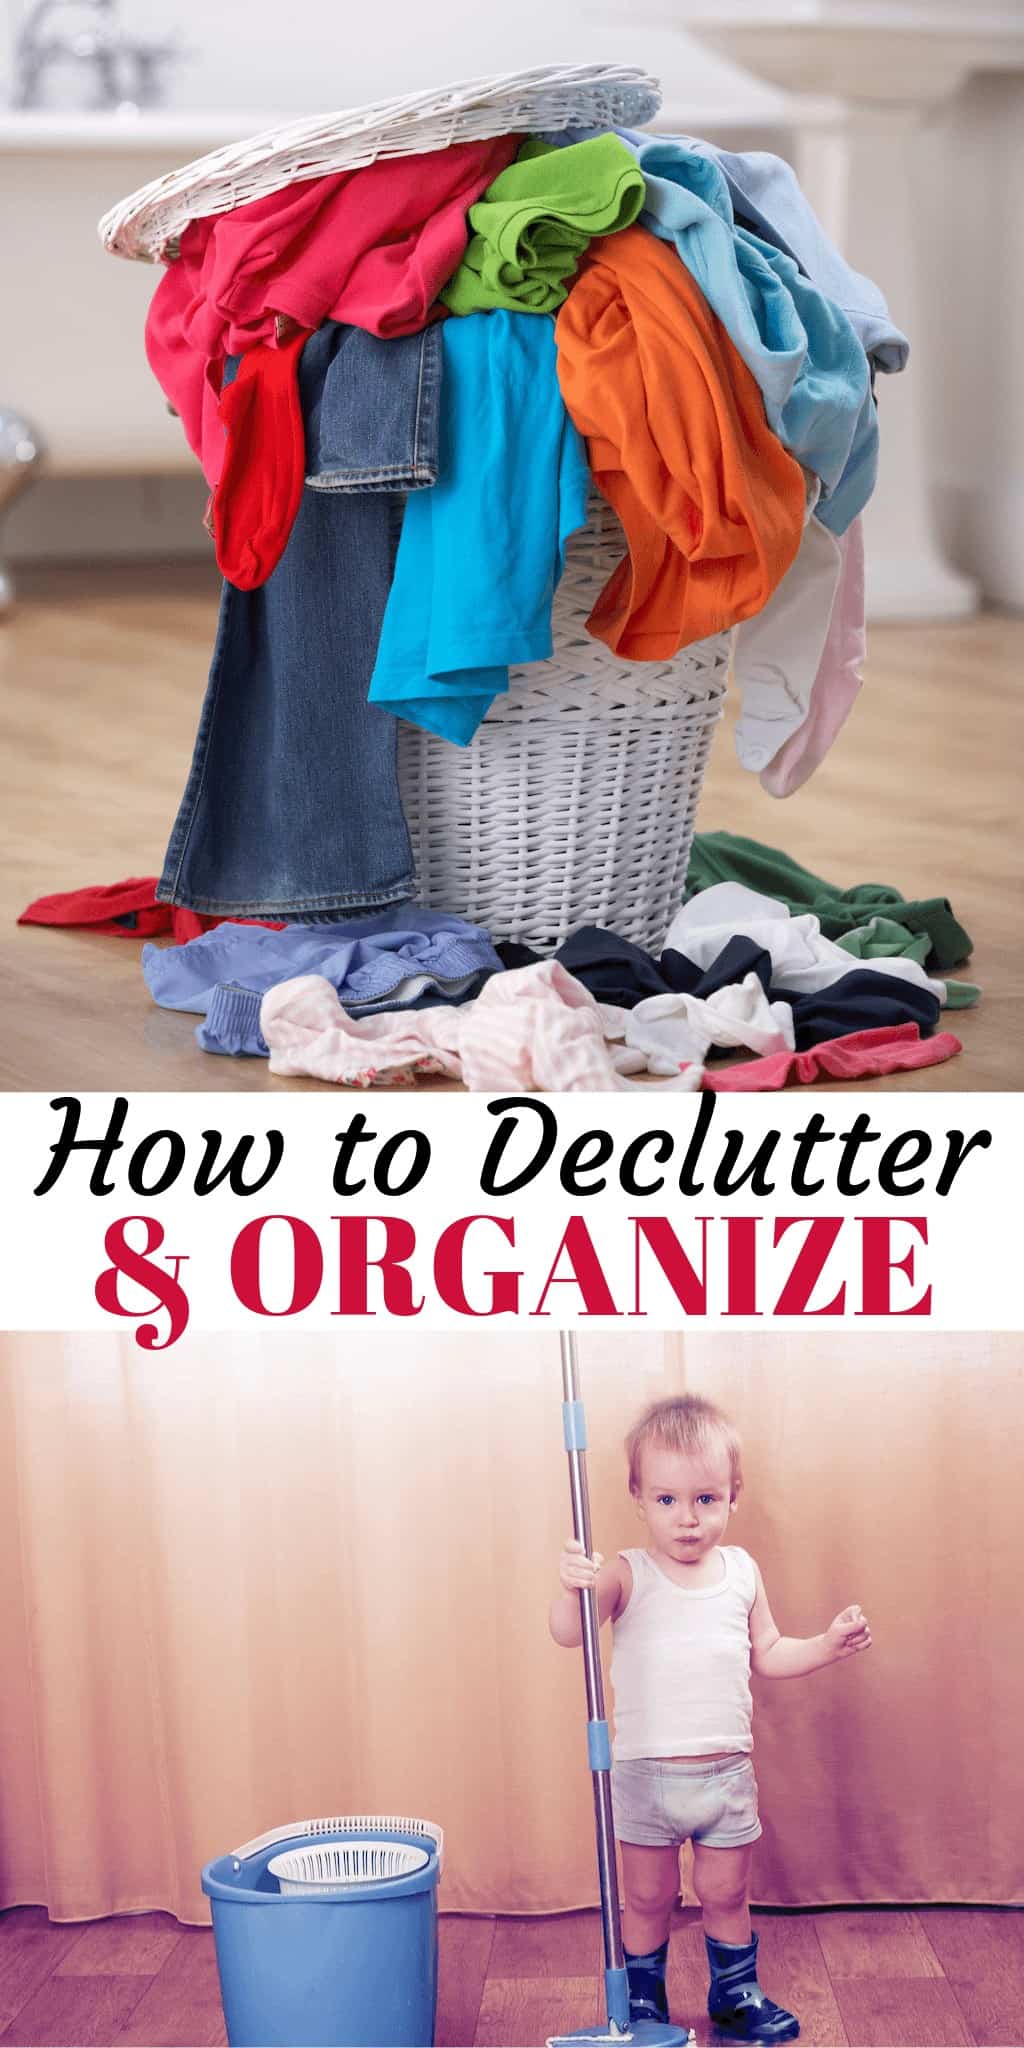 If you've decided to get a handle on your clutter, this article will offer some help with tips on how to de clutter and for maintaining your home afterward.